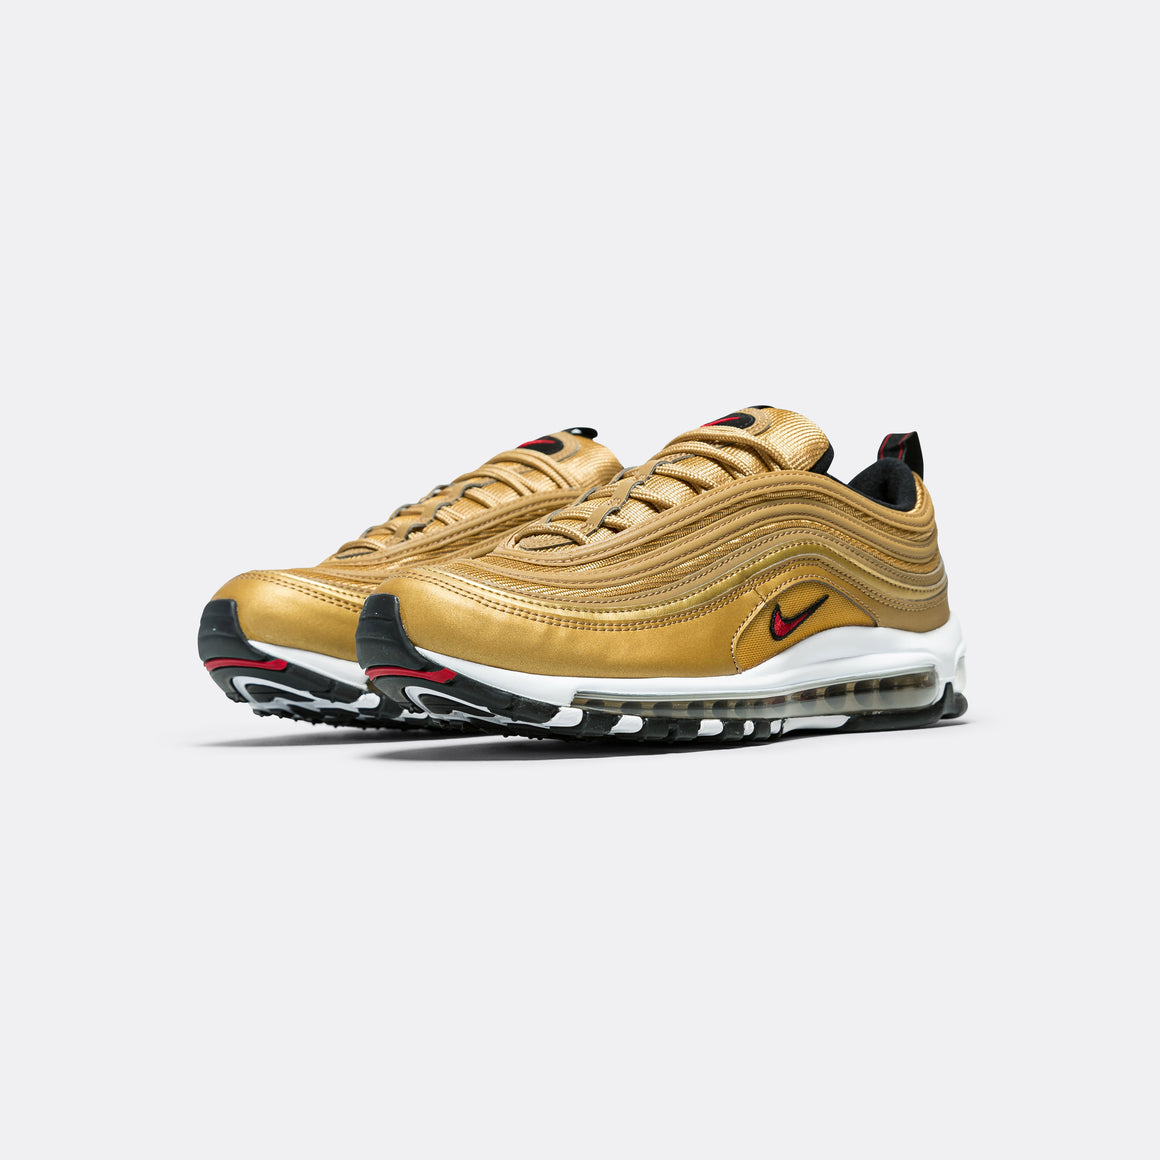 Príncipe Excelente apertura Nike Womens Air Max 97 OG - Metallic Gold/Varsity Red/Black | Up There